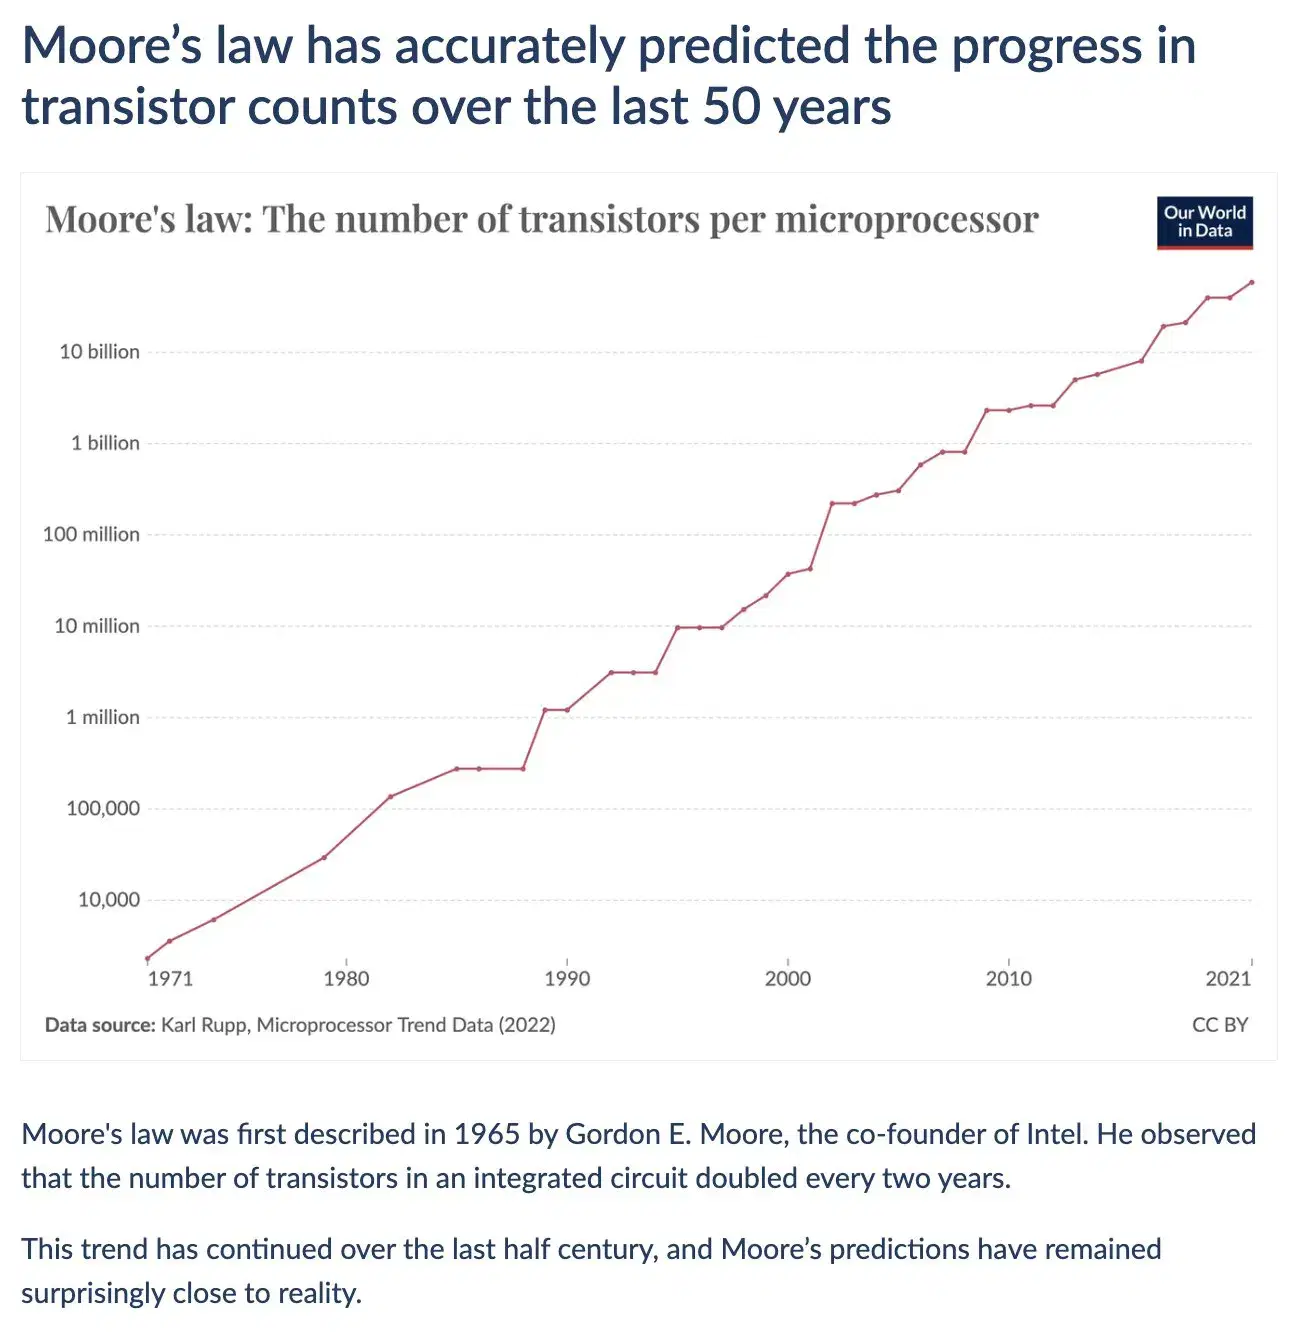 Moore’s Law has held true for more than half a century